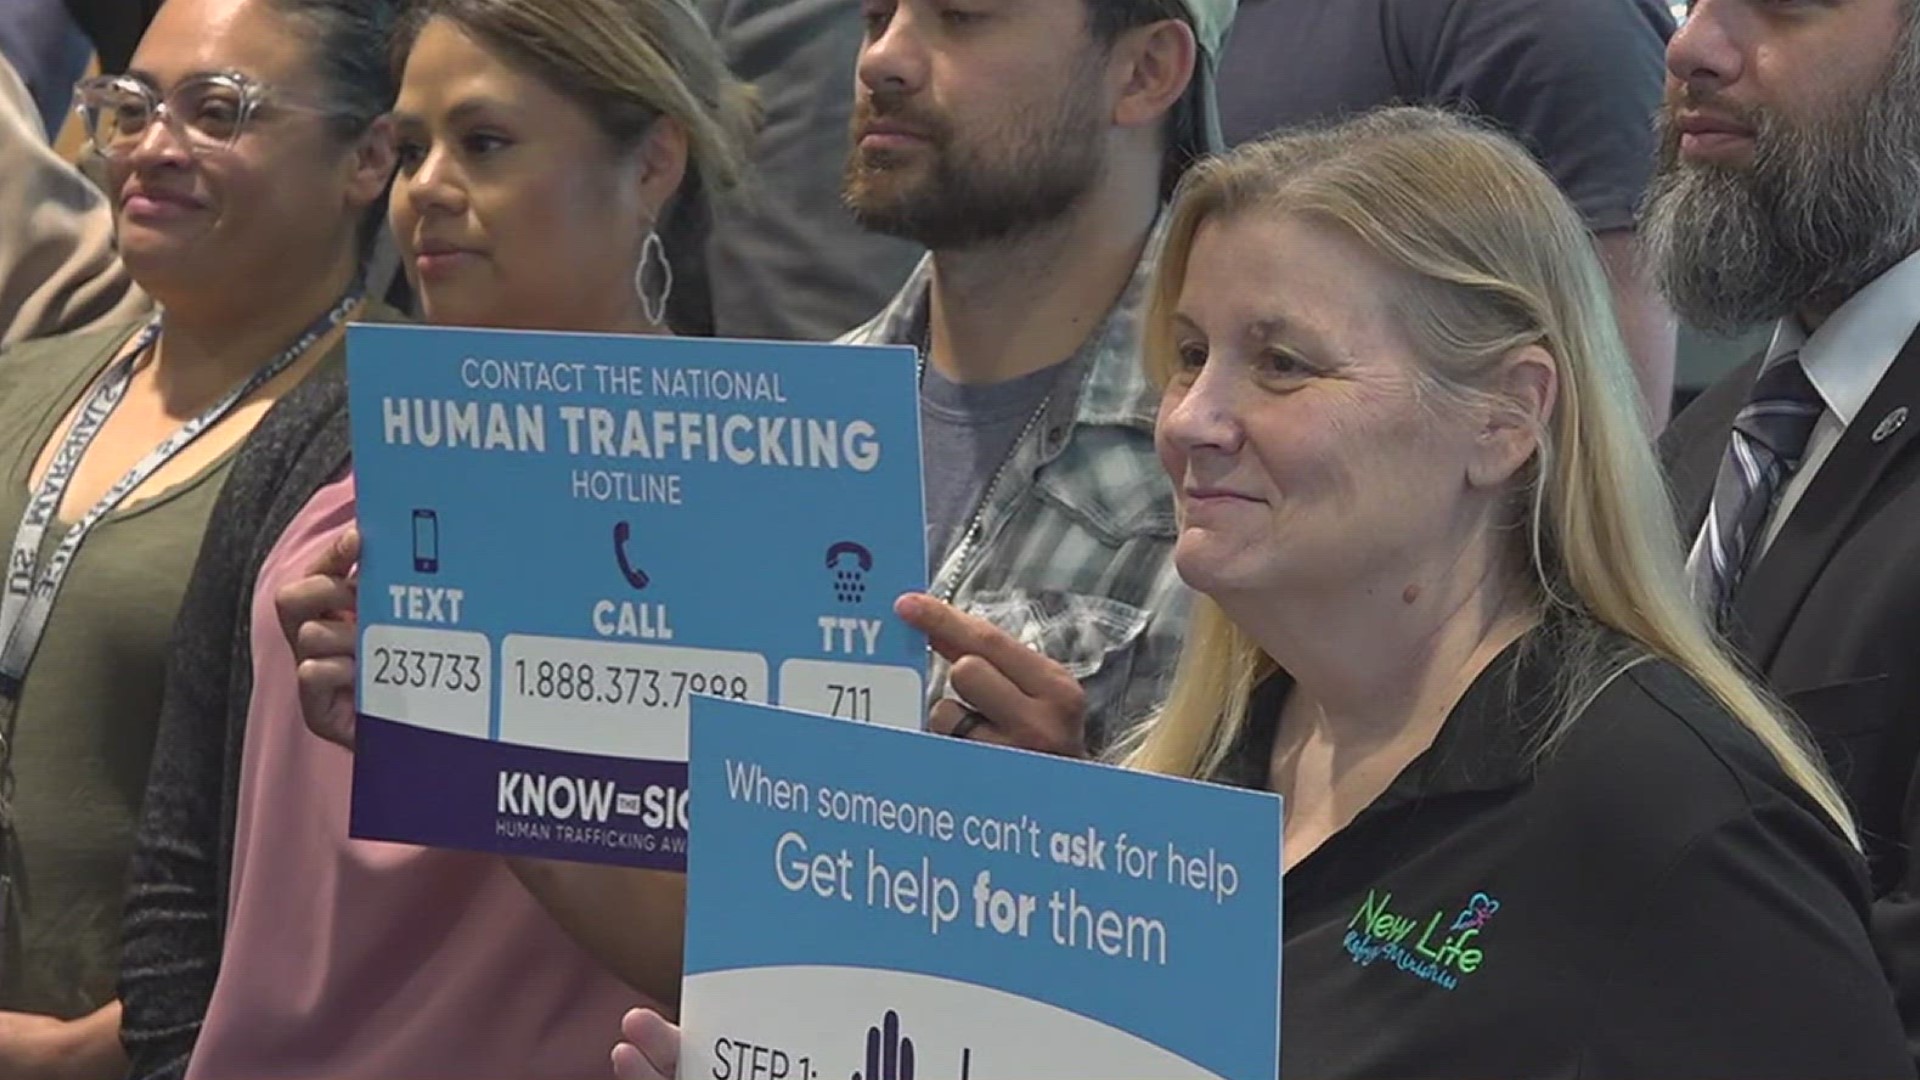 According to Sharon Ray, the educating coordinator for New Life Refuges, in 2019, there were 2,900 children in our area who fell victim to human trafficking.